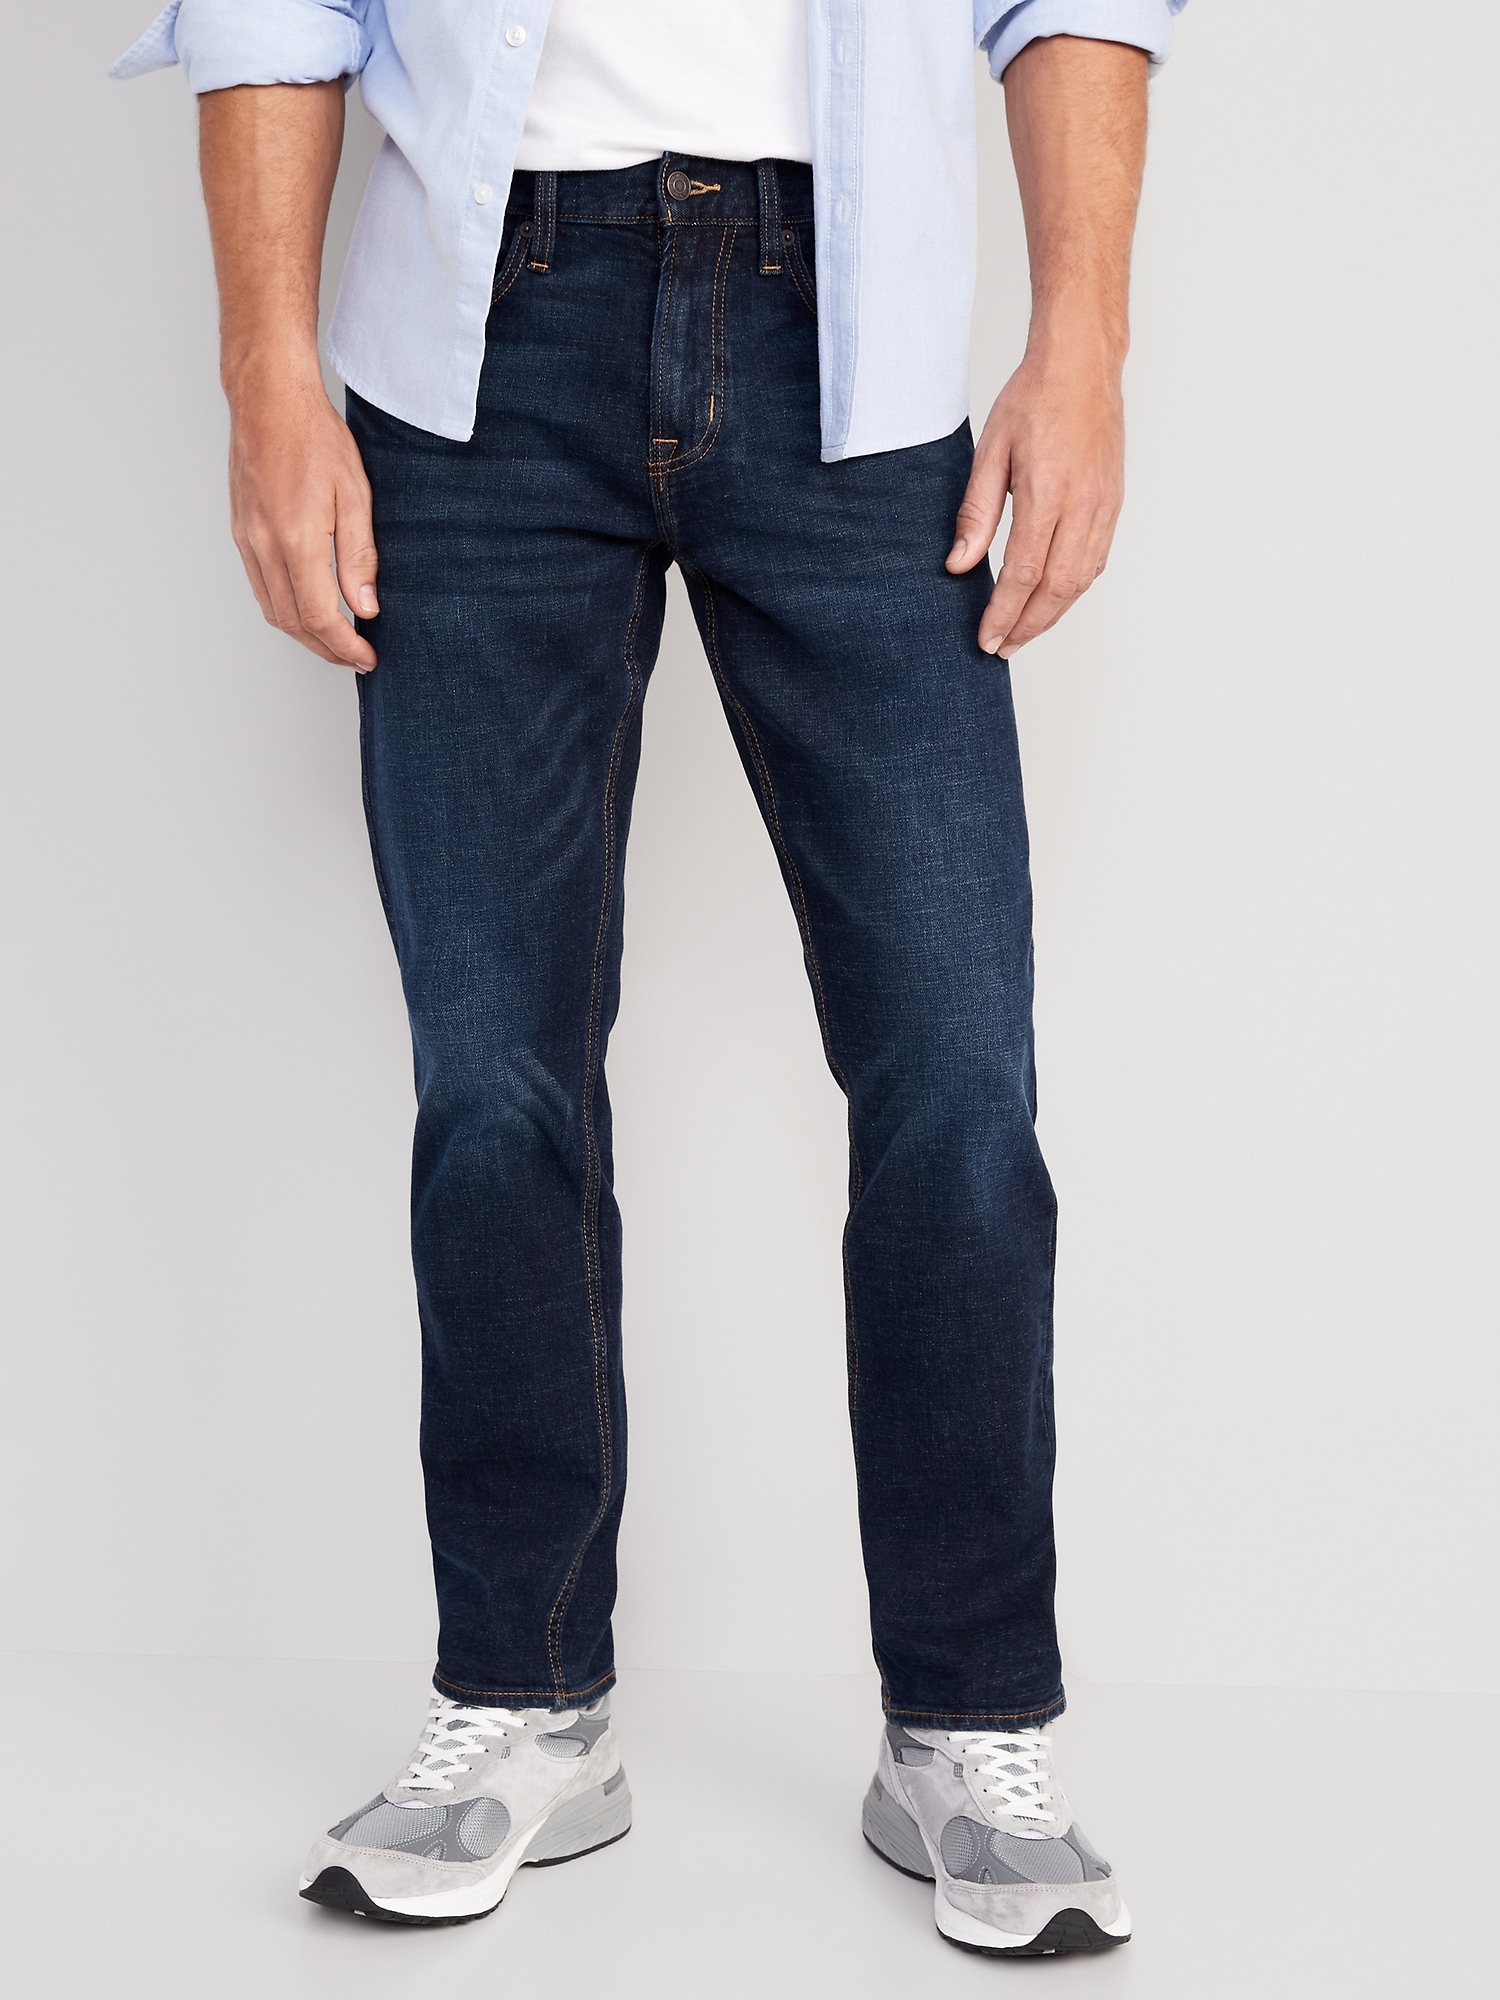 Fleece Lined Jeans at Rs 2299.00, Ahmedabad